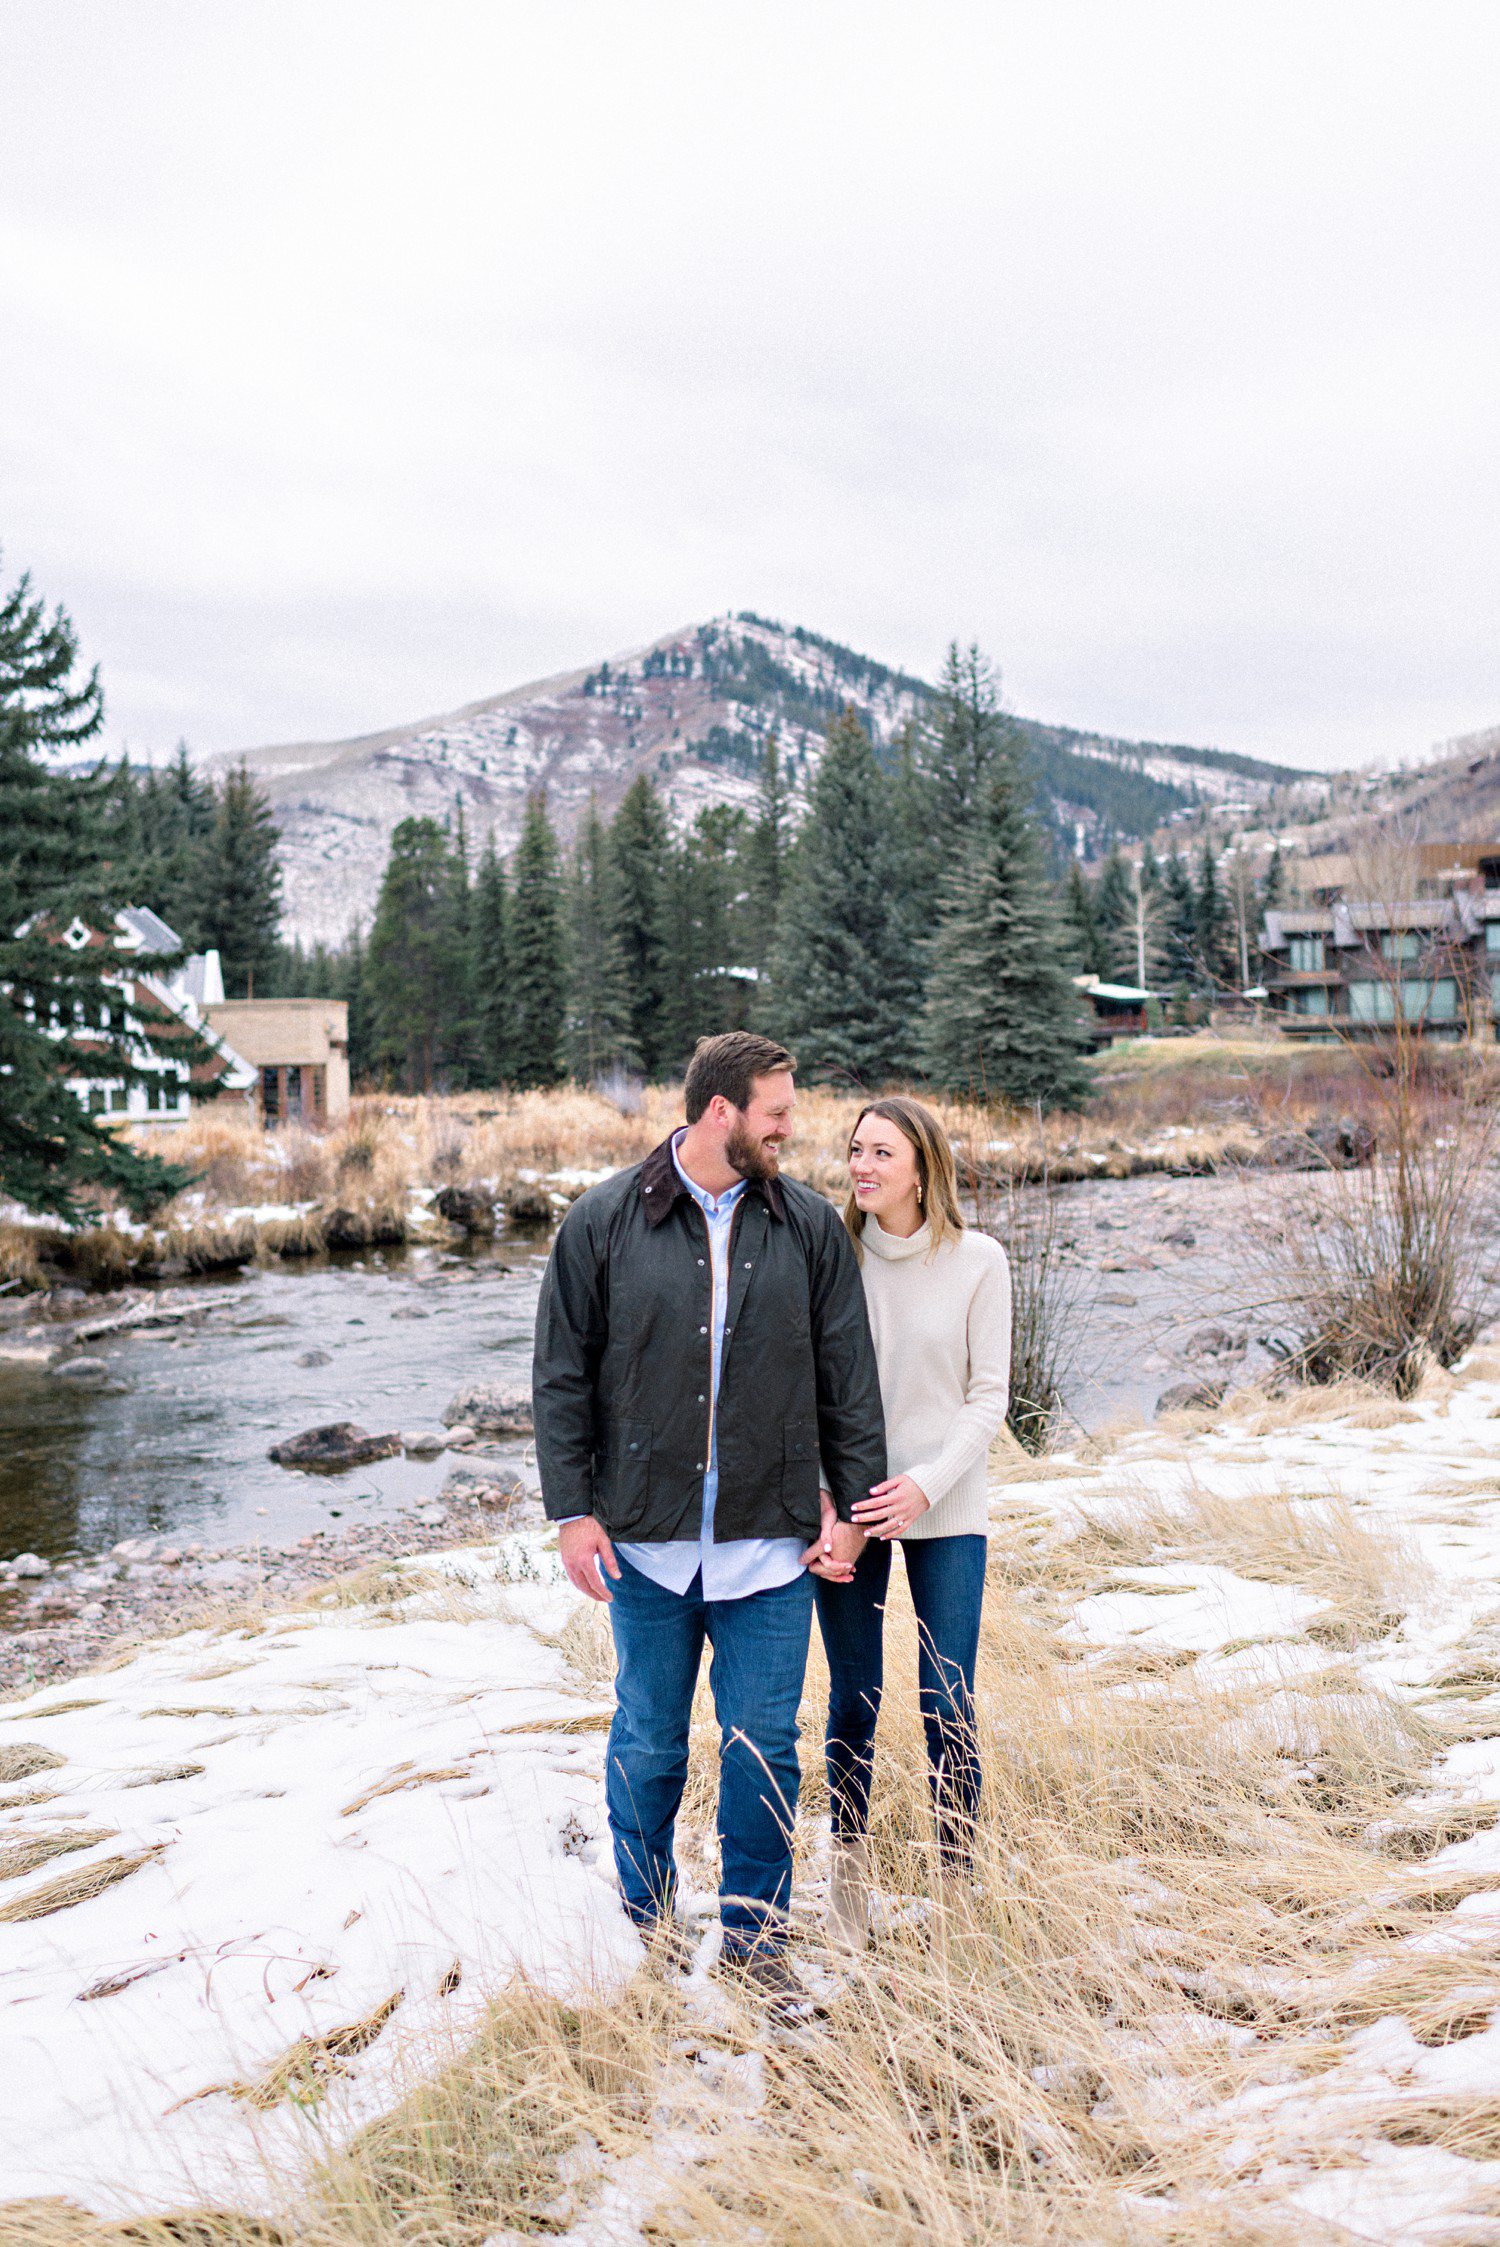 Winter Engagements in Vail Colorado